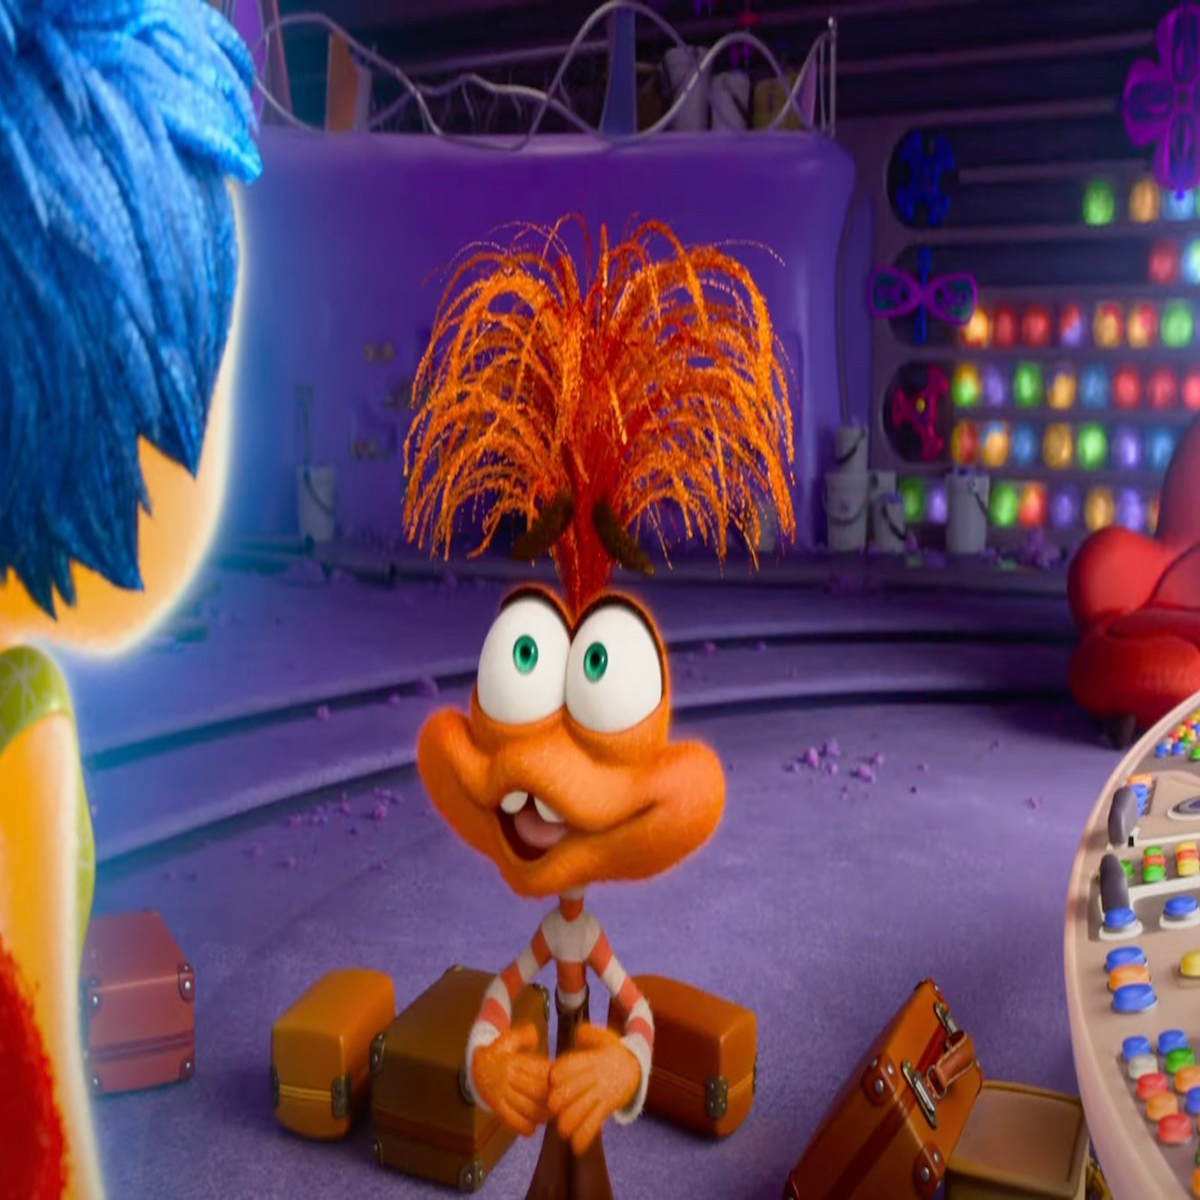 Meet the new emotion in Disney and Pixar's Inside Out 2: Anxiety